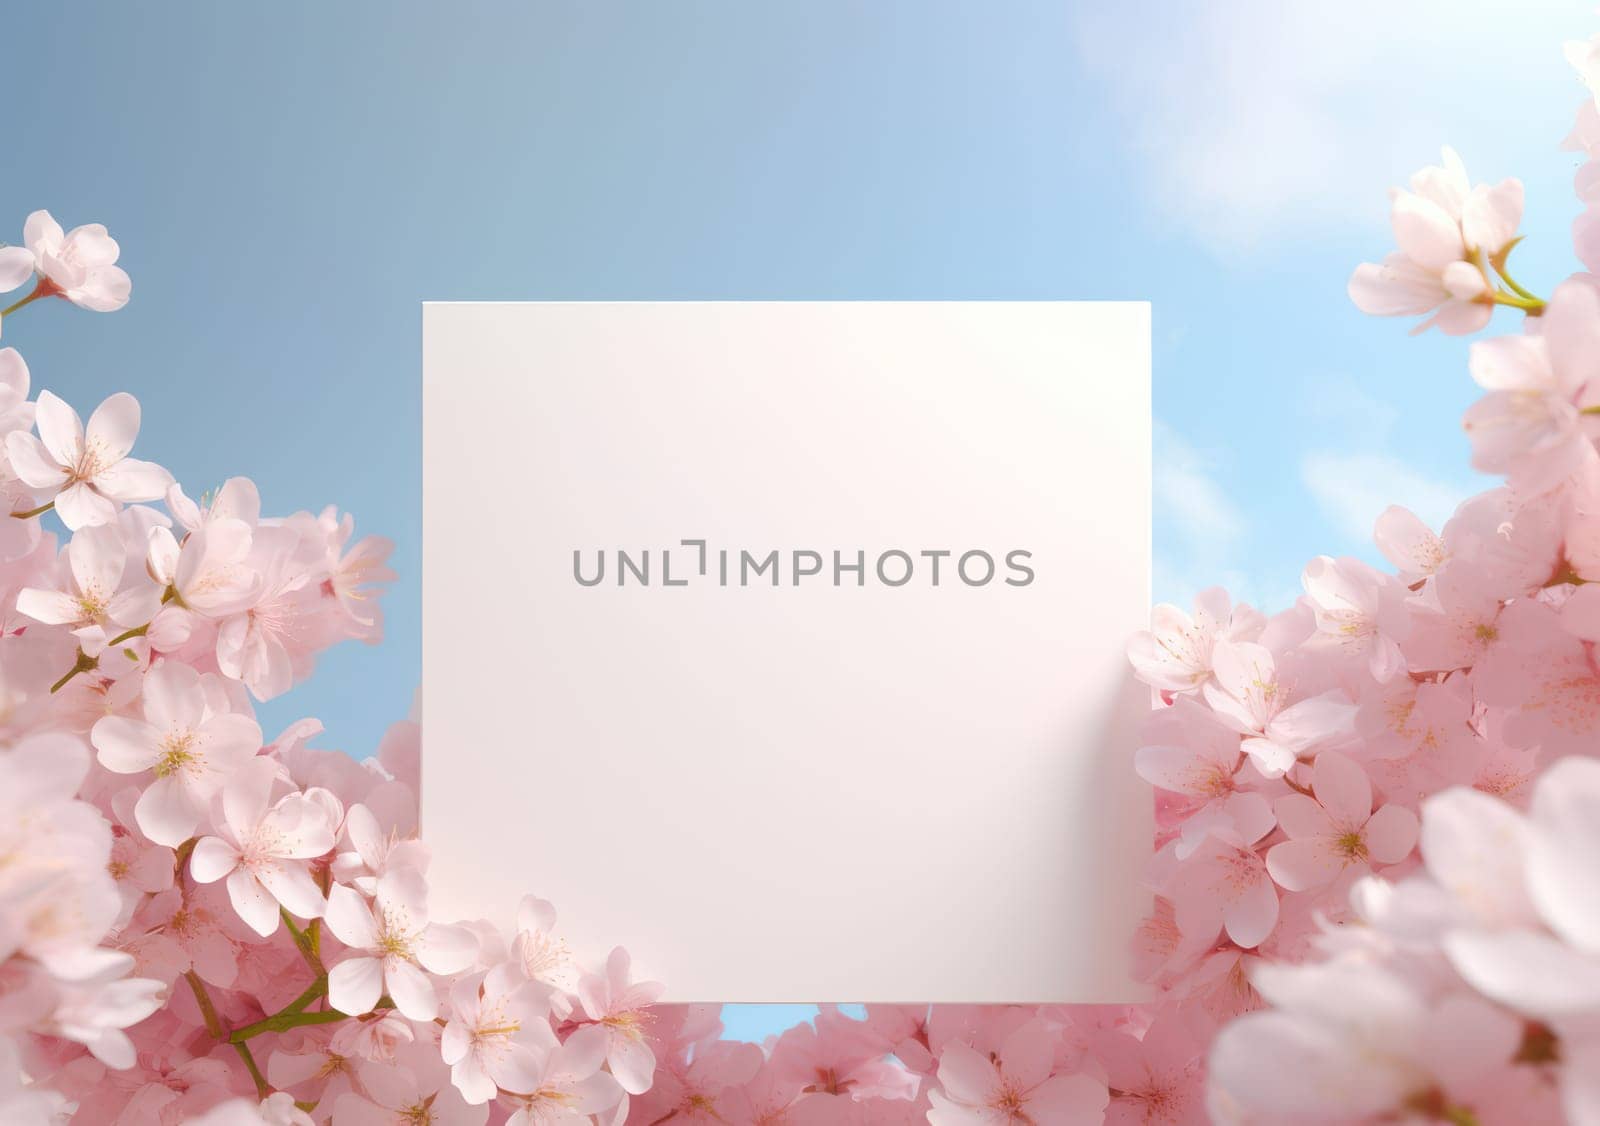 Spring Floral Composition: Blossoming Sakura Branch on White Background, Perfect for Greeting Card or Gift, Romantic and Fresh, Japanese Cherry Blossoms in Pastel Pink and White Petals, Nature's Beauty in a Frame. by Vichizh